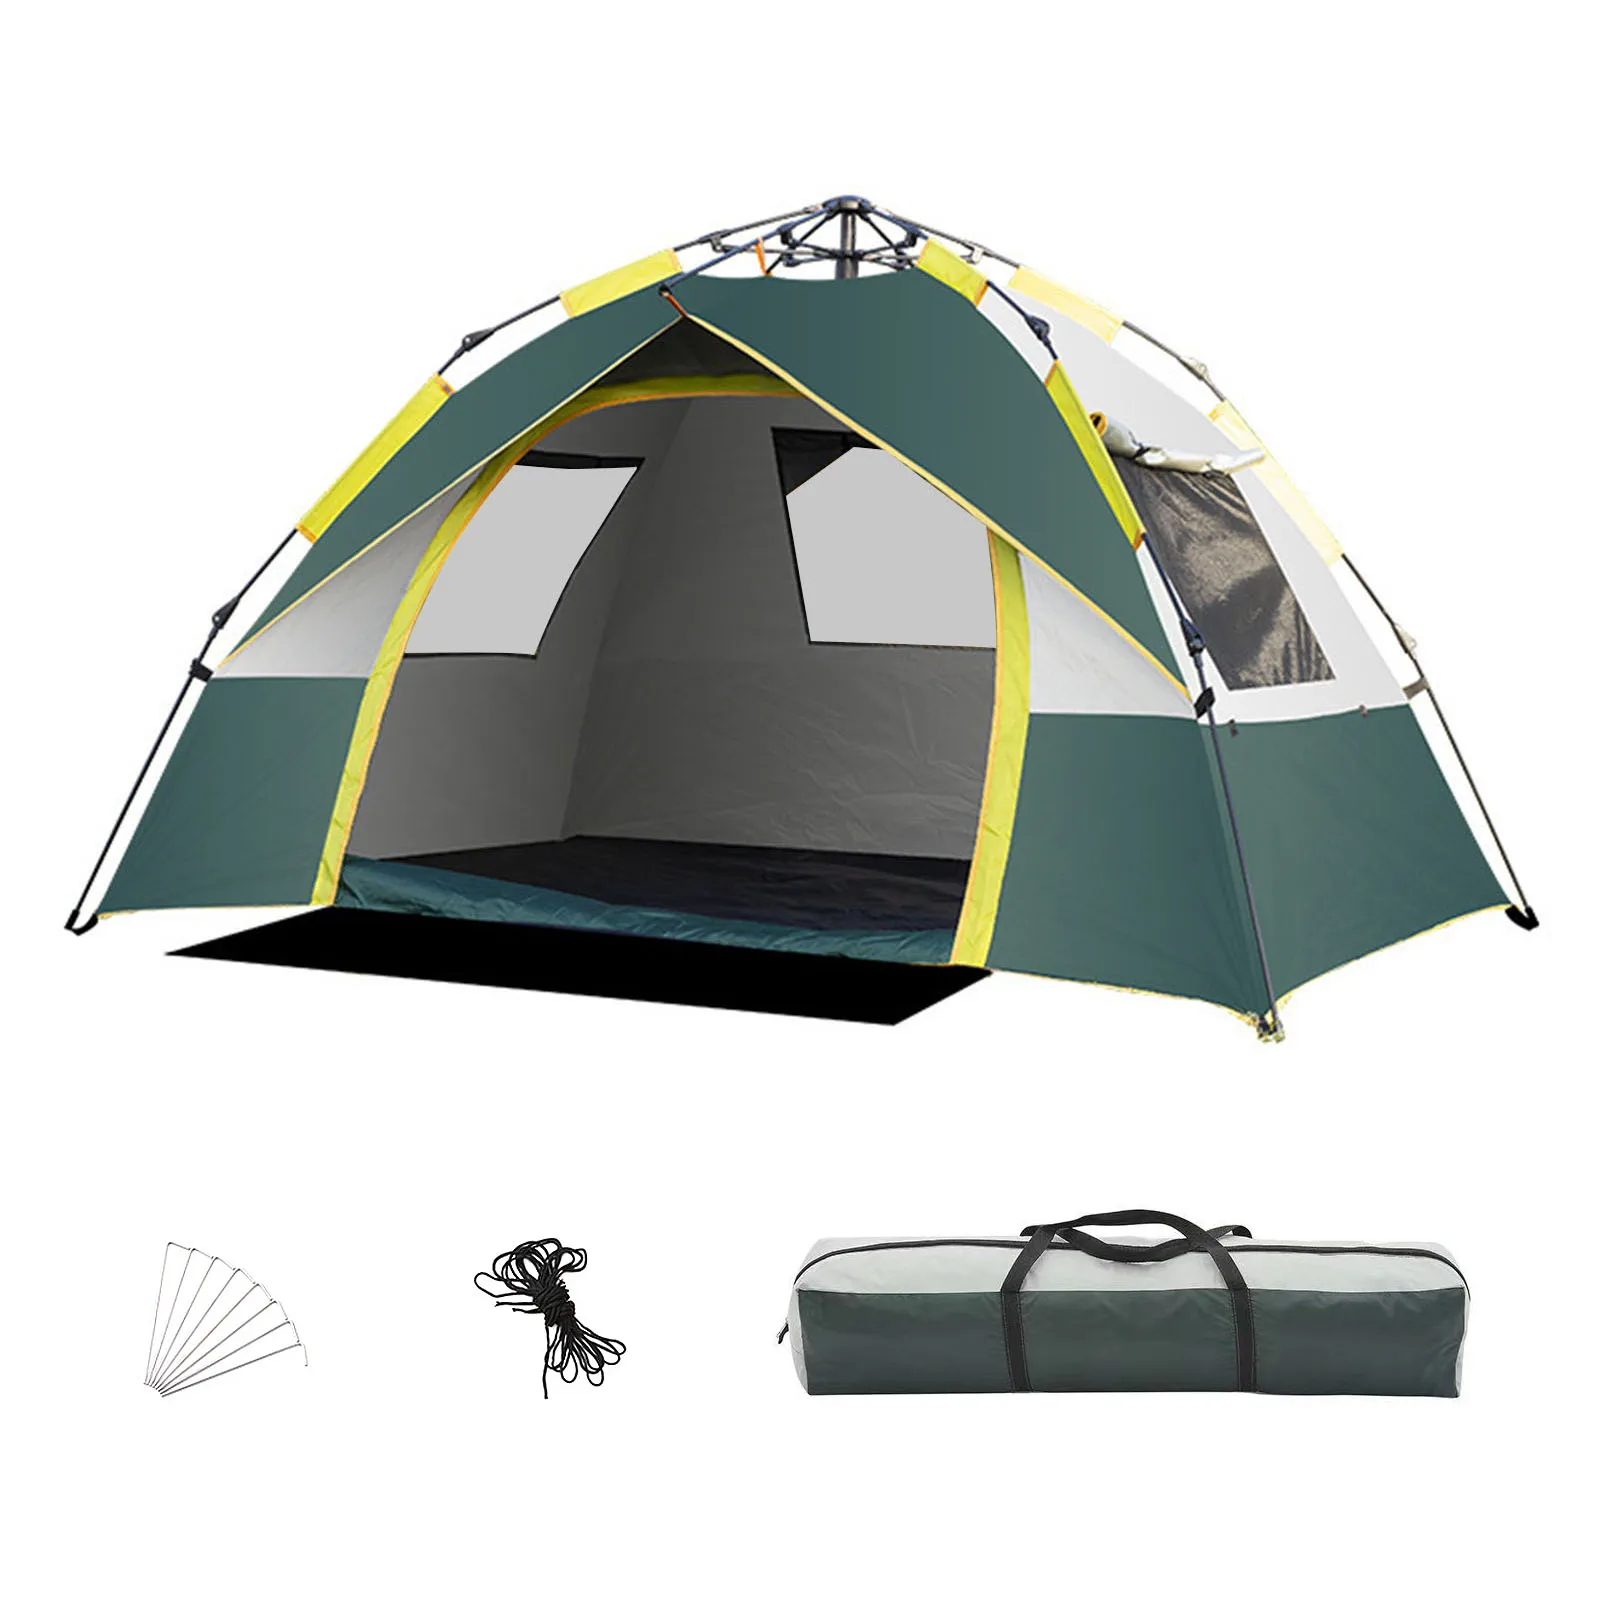 Camping Tent Double Doors Waterproof Family Tent Quick Setup Double Doors And Double Windows Sunscreen & Waterproof For Fine